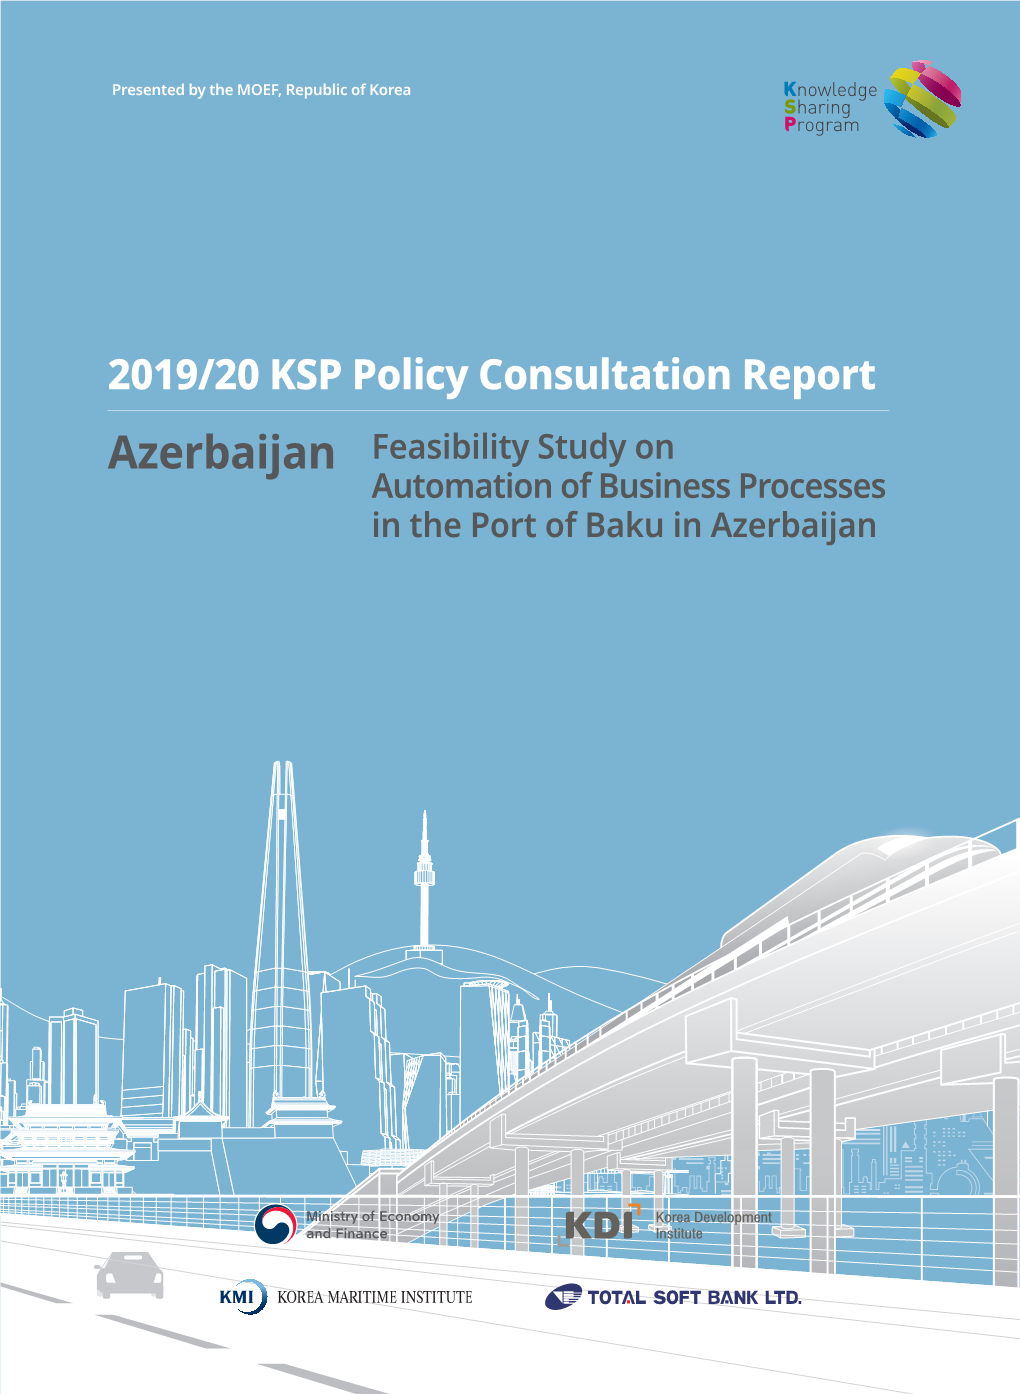 Feasibility Study on Automation of Business Processes in the Port of Baku in Azerbaijan Government Publications Registration Number 11-1051000-001028-01